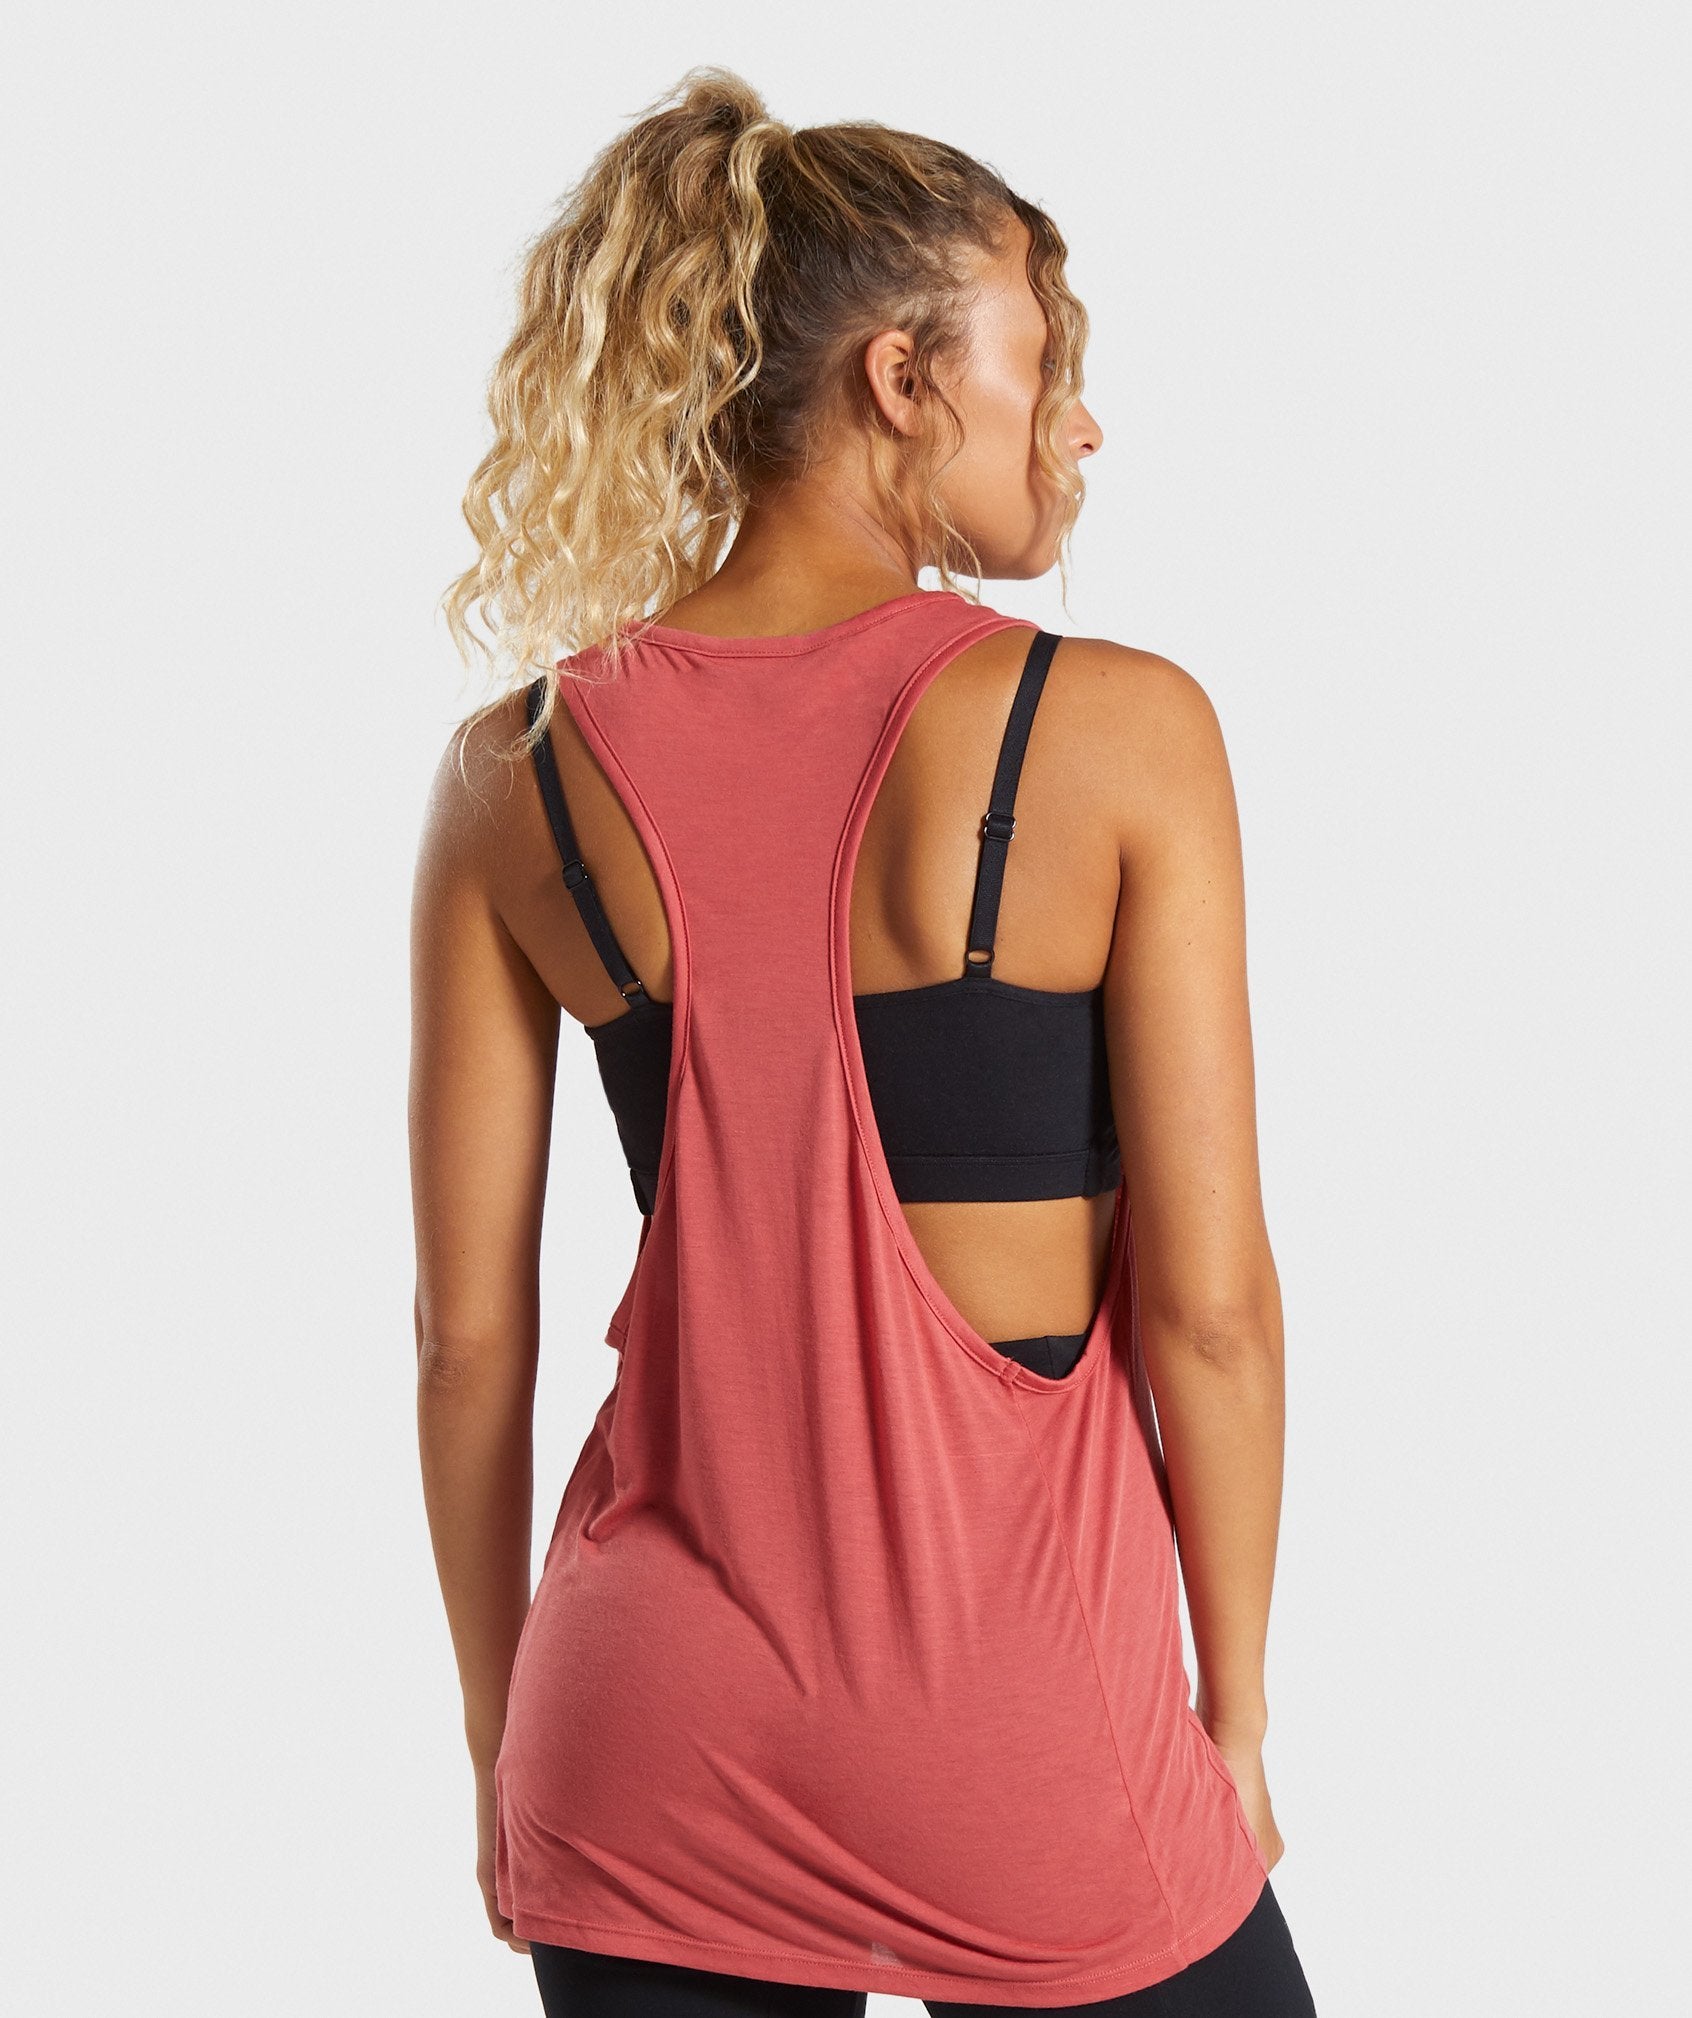 Legacy Fitness Drop Arm Vest in Brick Red - view 2